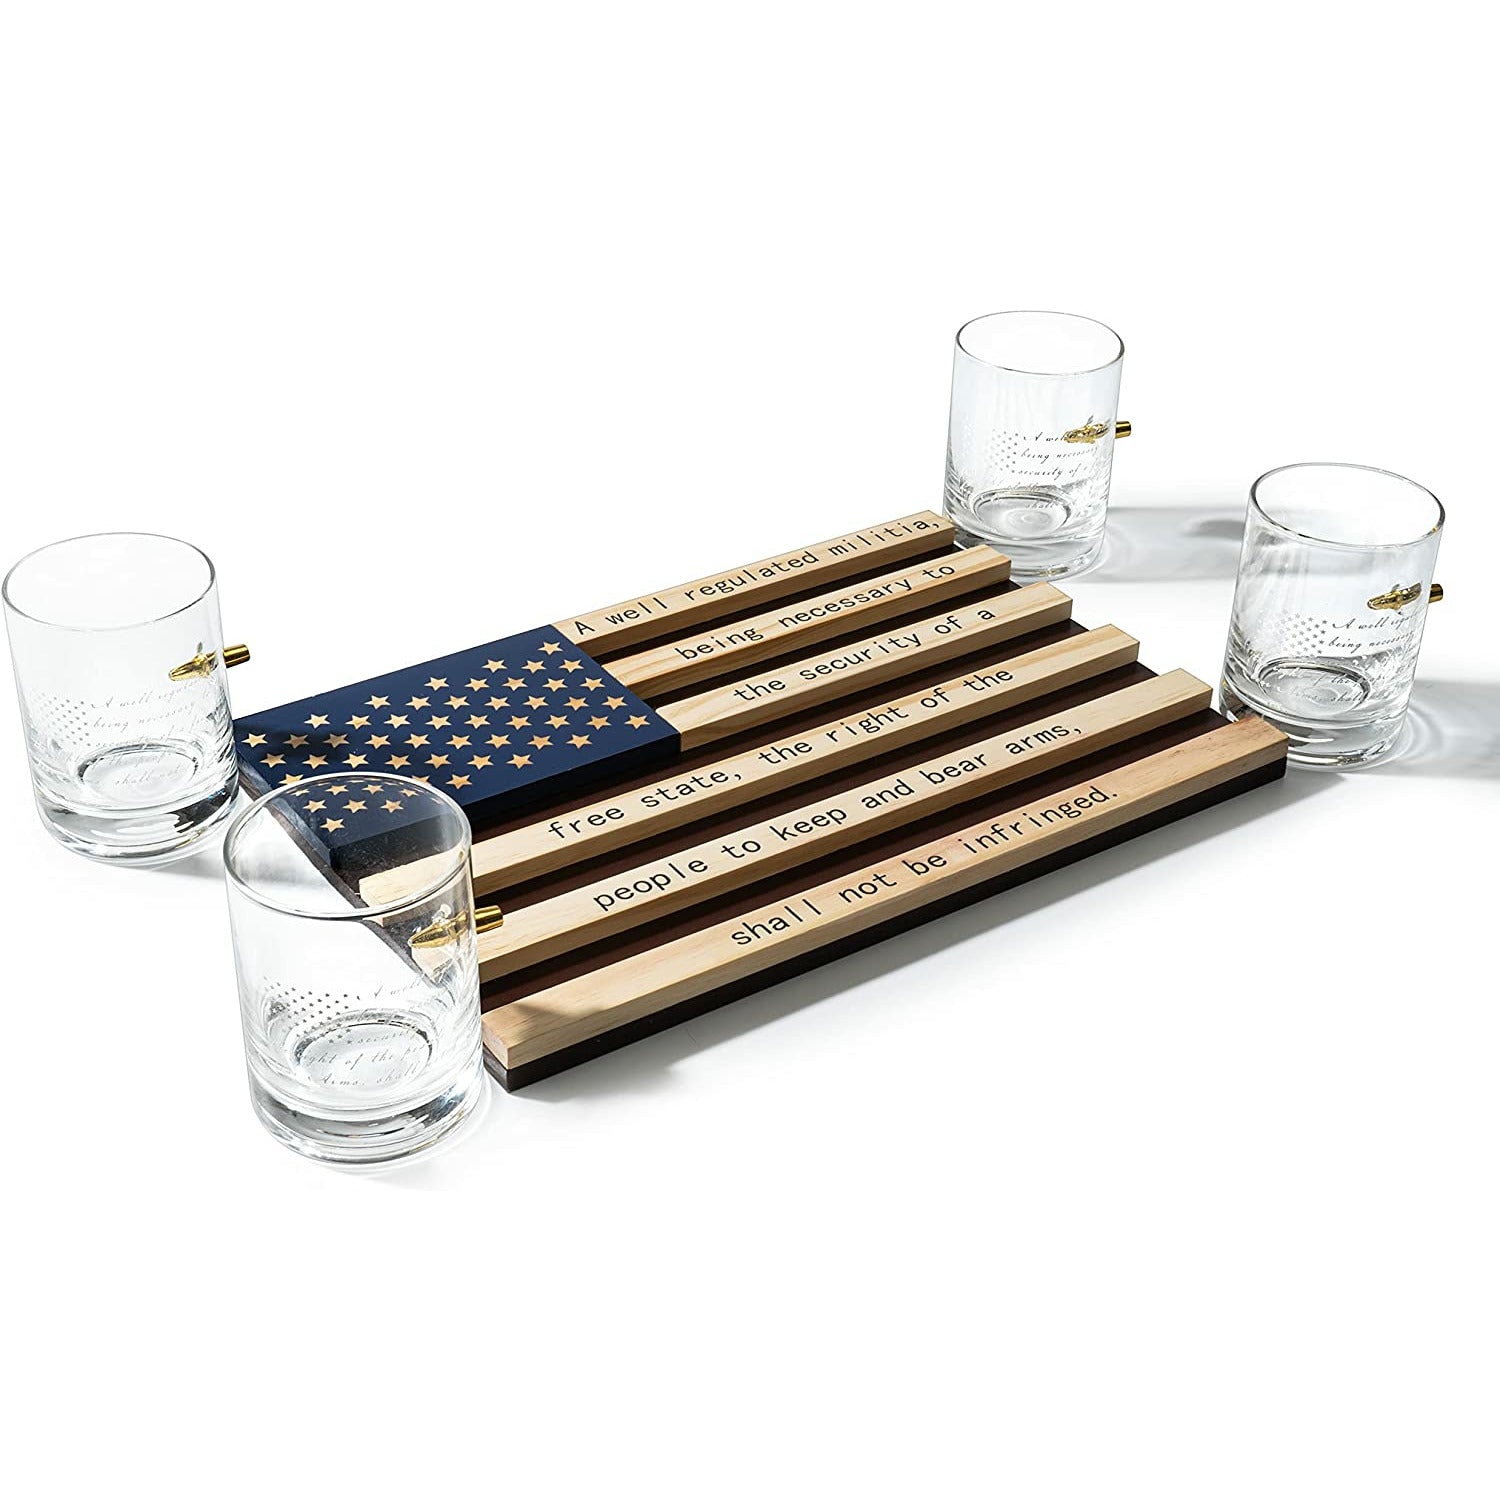 2nd Amendment American Flag Bullet Glasses .308 Real Solid Copper Projectile, Set of 4 Hand Blown Old Fashioned Whiskey Rocks Glasses, Wood Flag Tray with Patriots Gun Rights Law & Military Gift Set-5